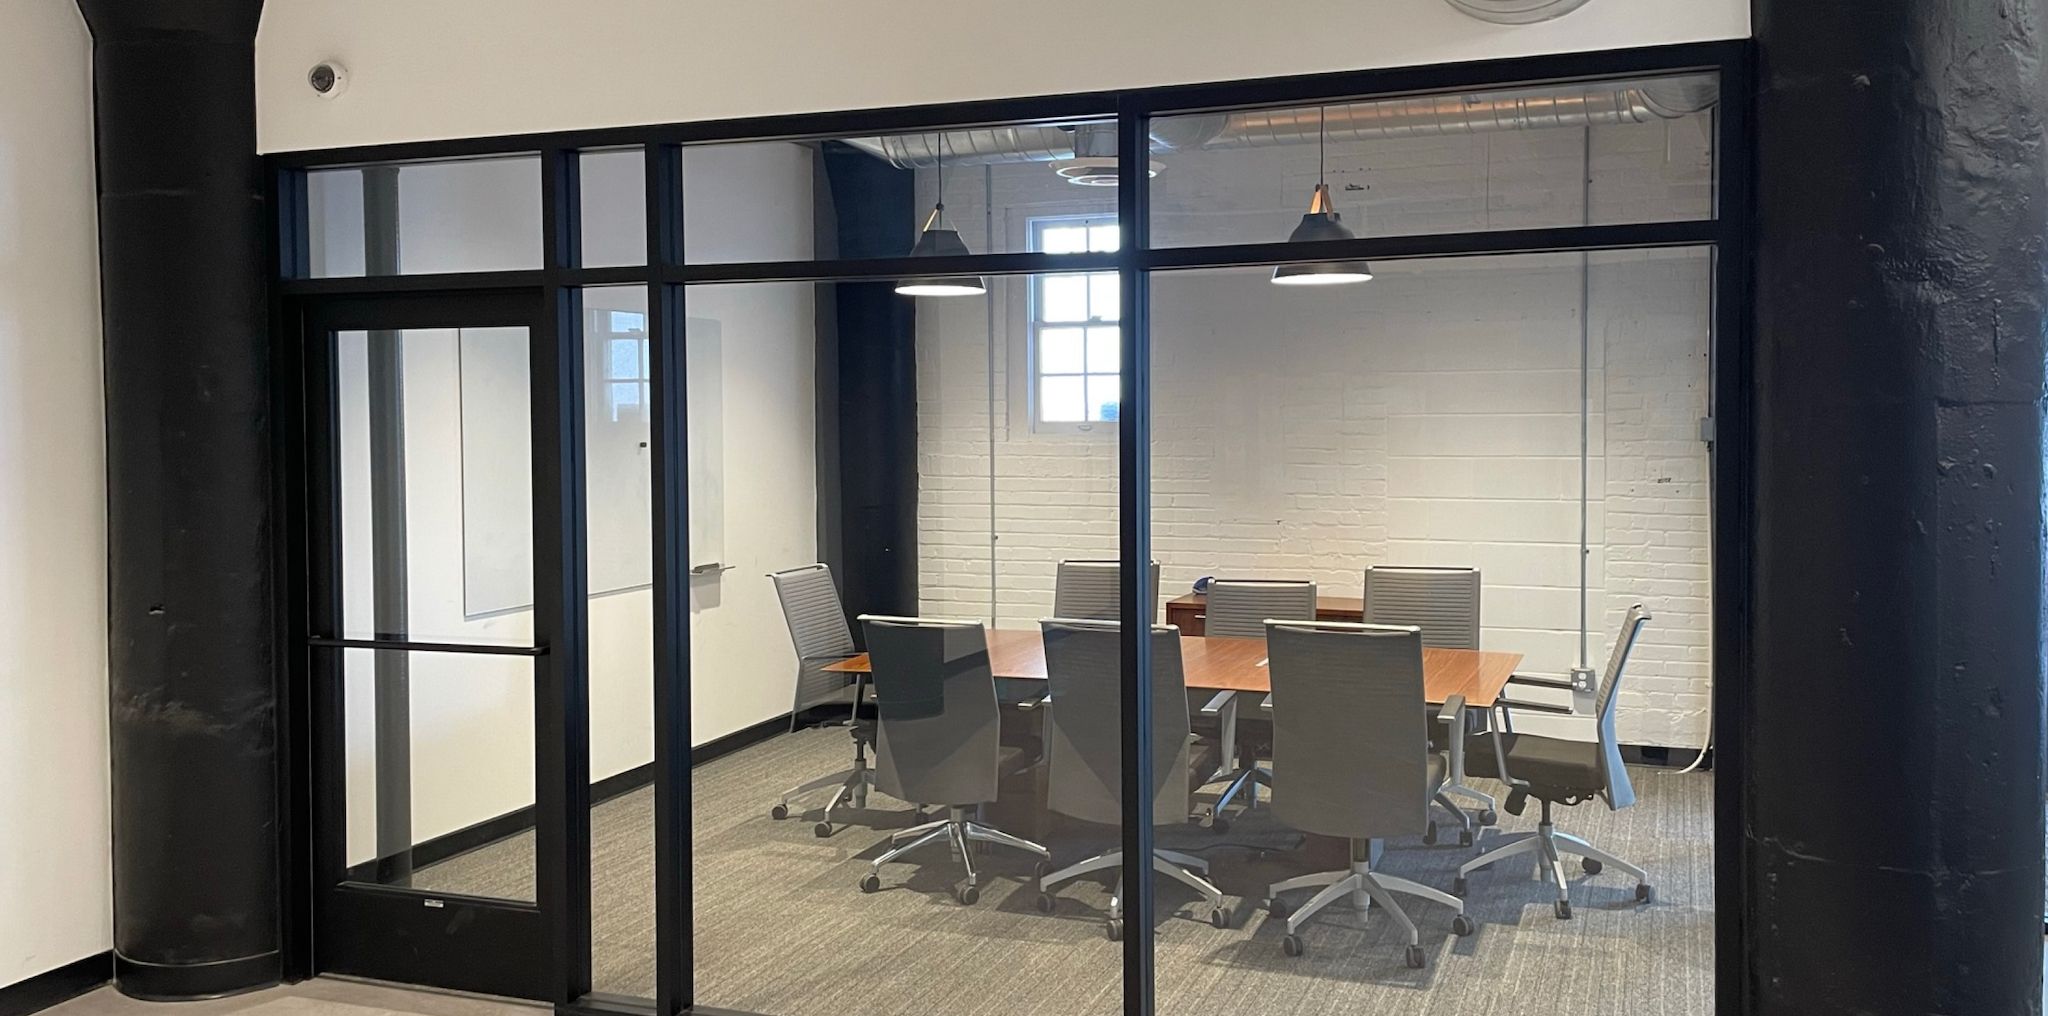 Image of conference style room in W2 Works Warehouse